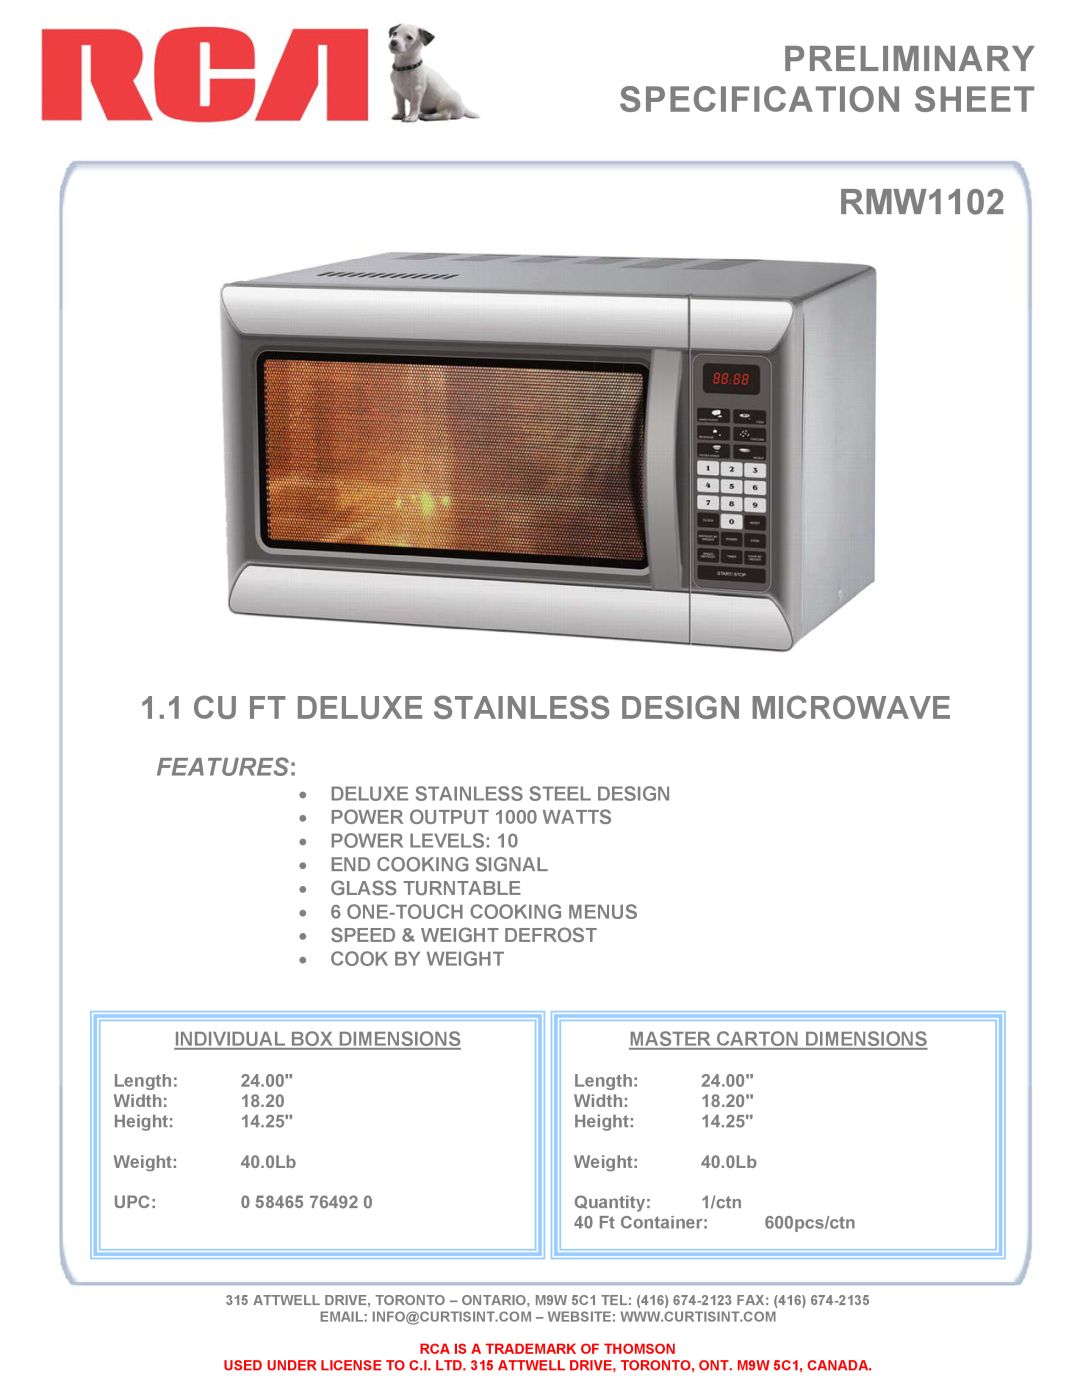 Curtis specifications PRELIMINARY SPECIFICATION SHEET RMW1102, Cu Ft Deluxe Stainless Design Microwave, Features 